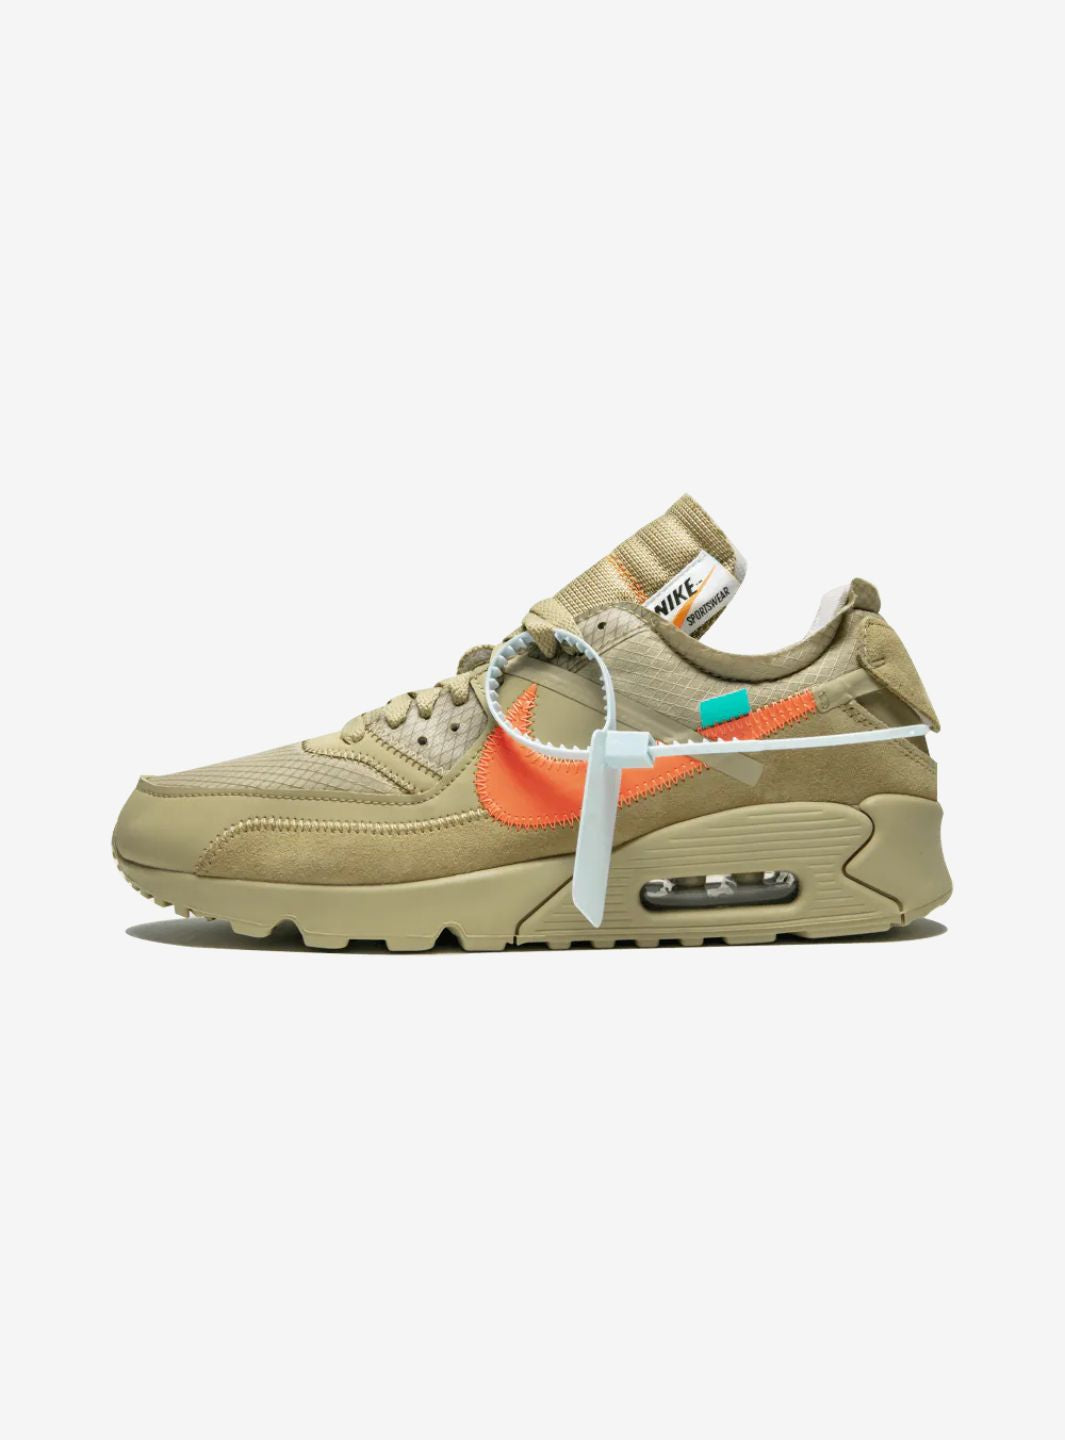 Nike Air Max 90 Off-White Desert Ore - AA7293-200 | ResellZone